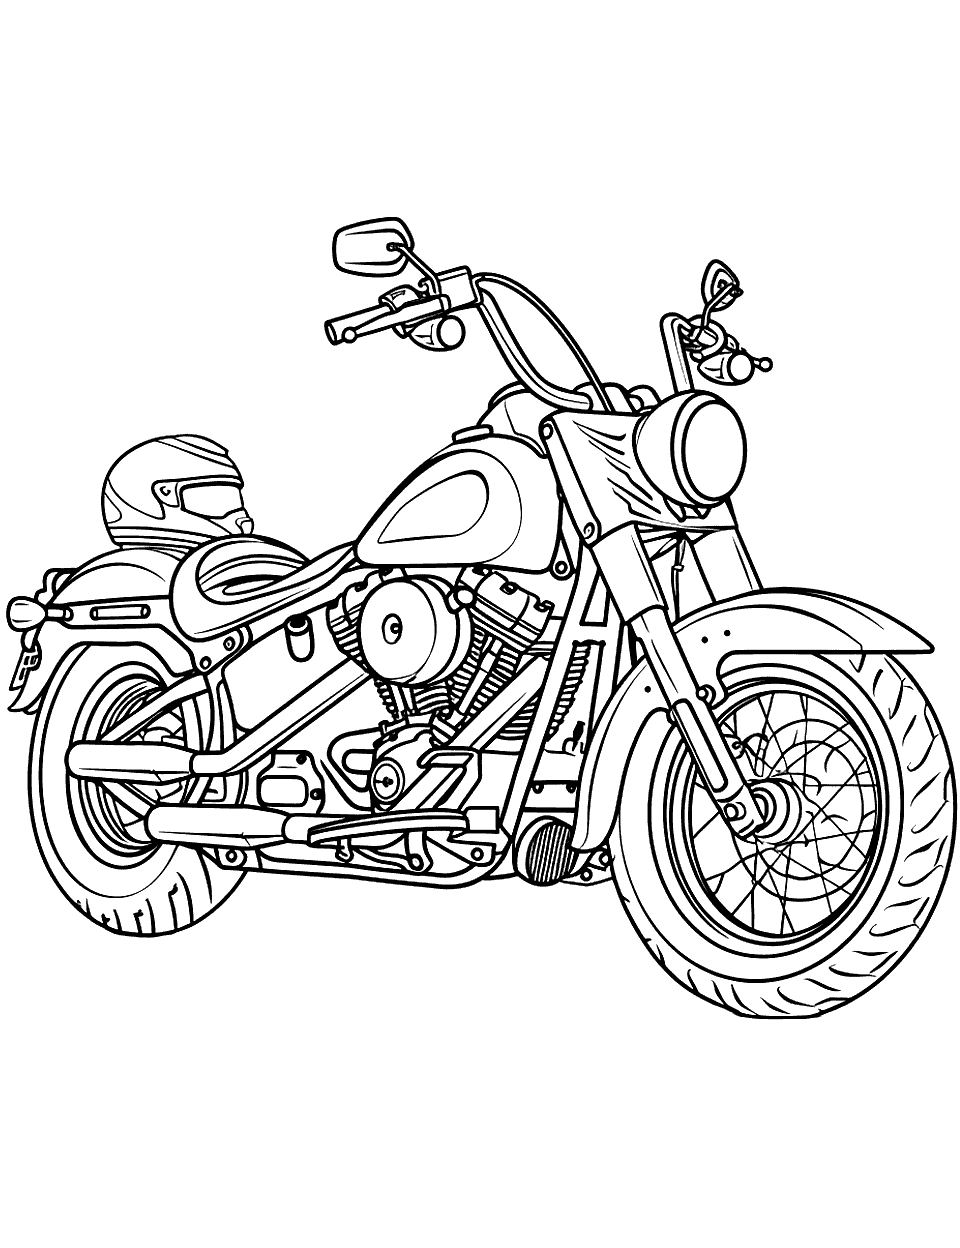 Classic Harley Davidson Motorcycle Coloring Page - A Harley Davidson motorcycle parked with a helmet resting on the seat.